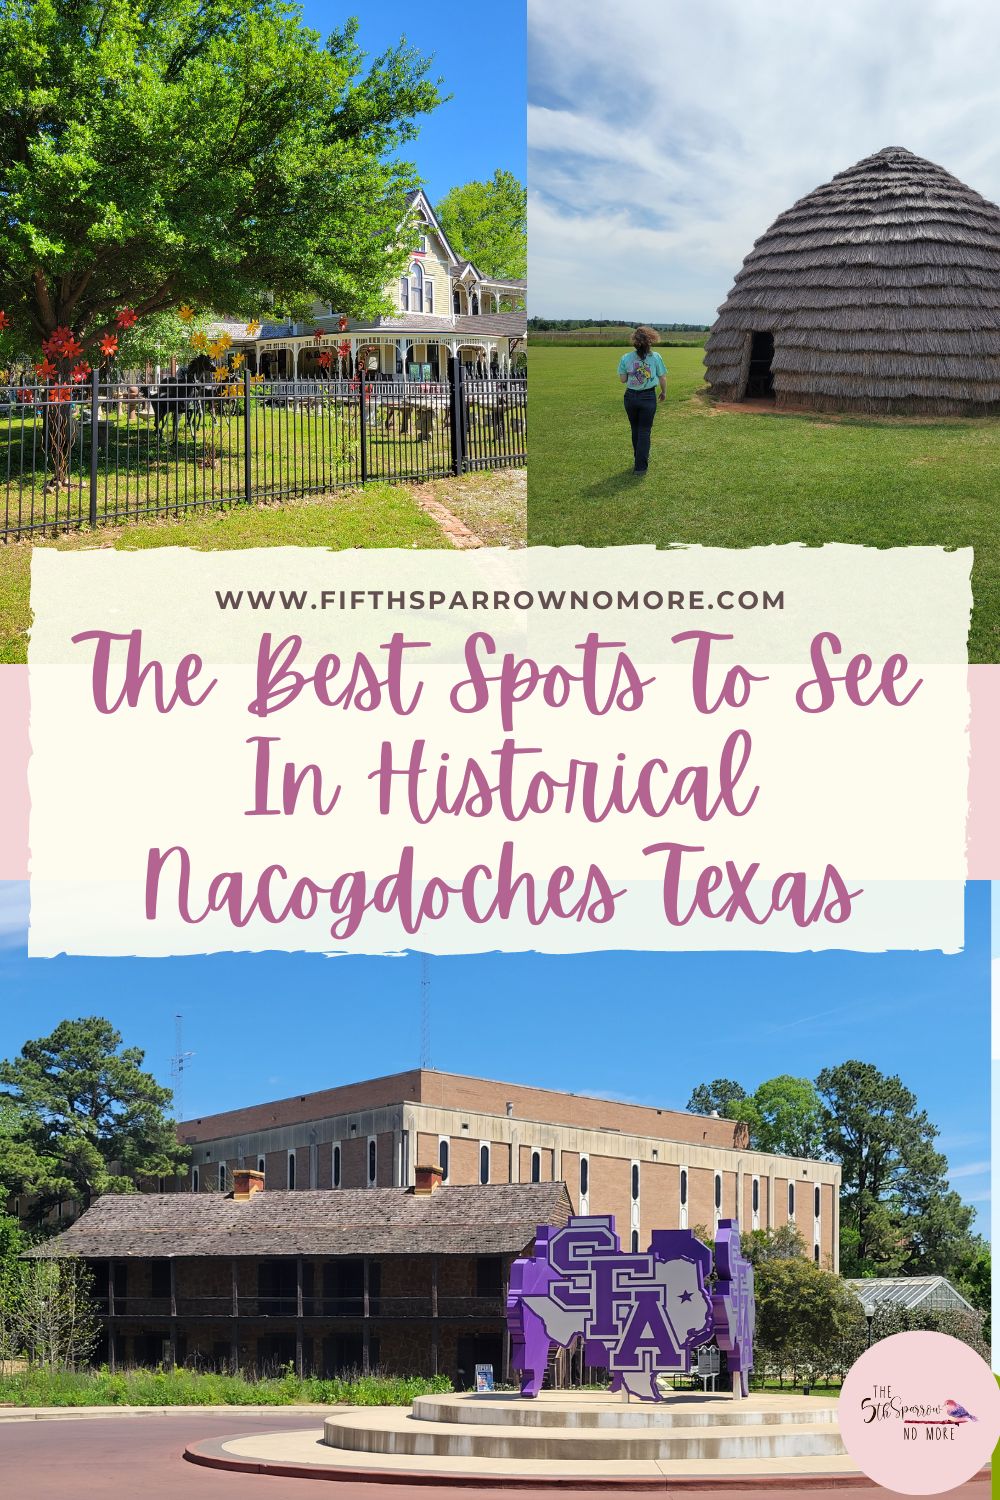 This post shares the best spots to see in historical Nacogdoches Texas. Favorite things to do are visit historic sites and shop downtown.